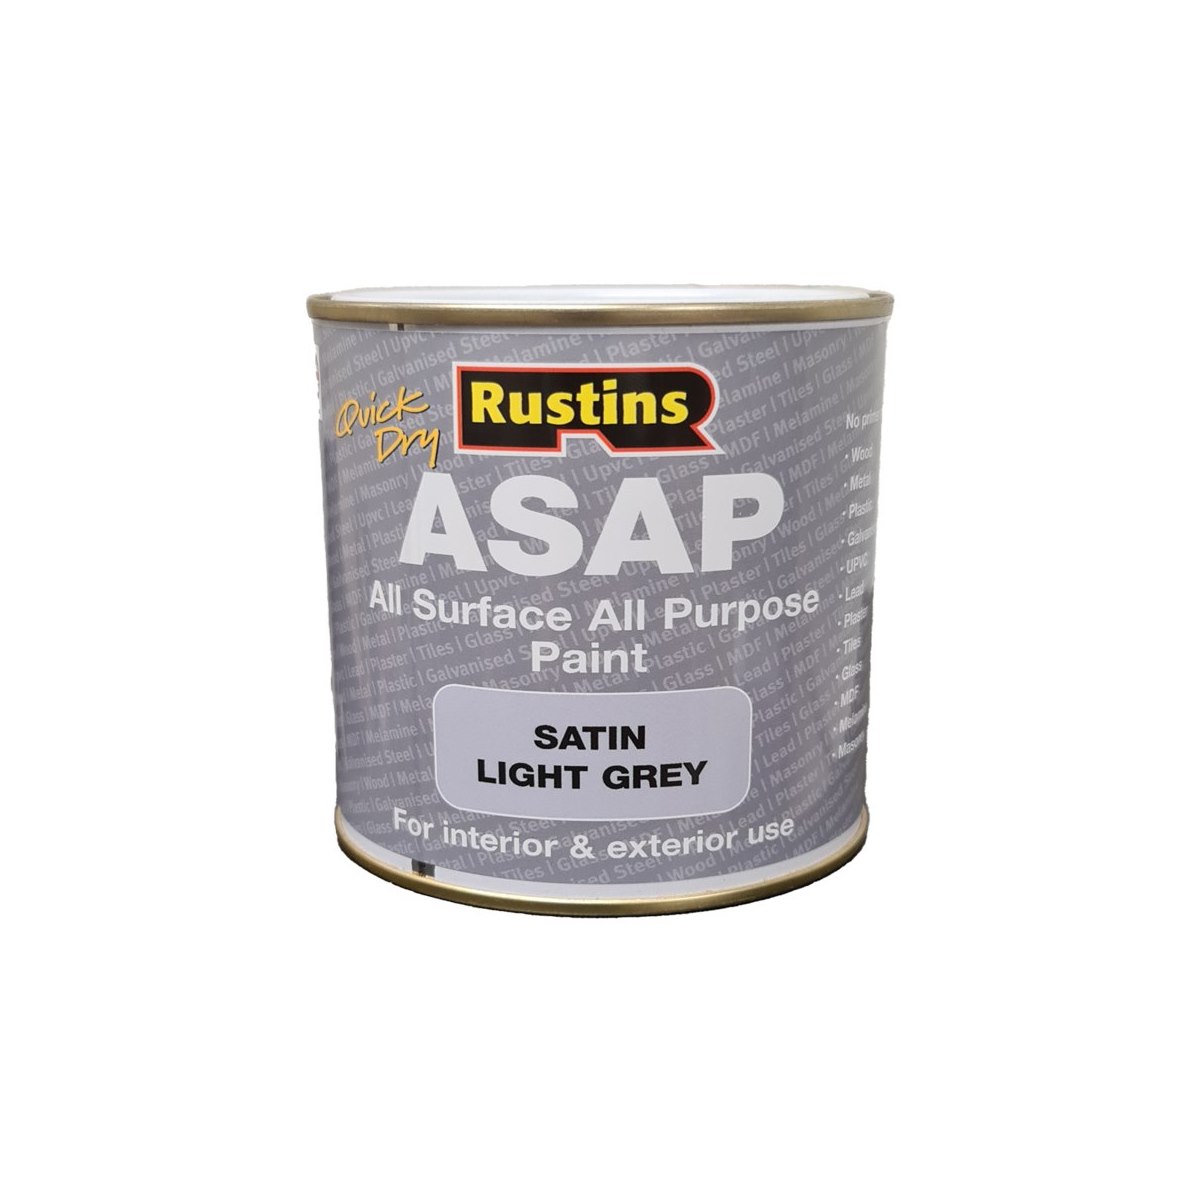 Rustins Quick Dry All Surface All Purpose Paint (ASAP) Light Grey 250ml